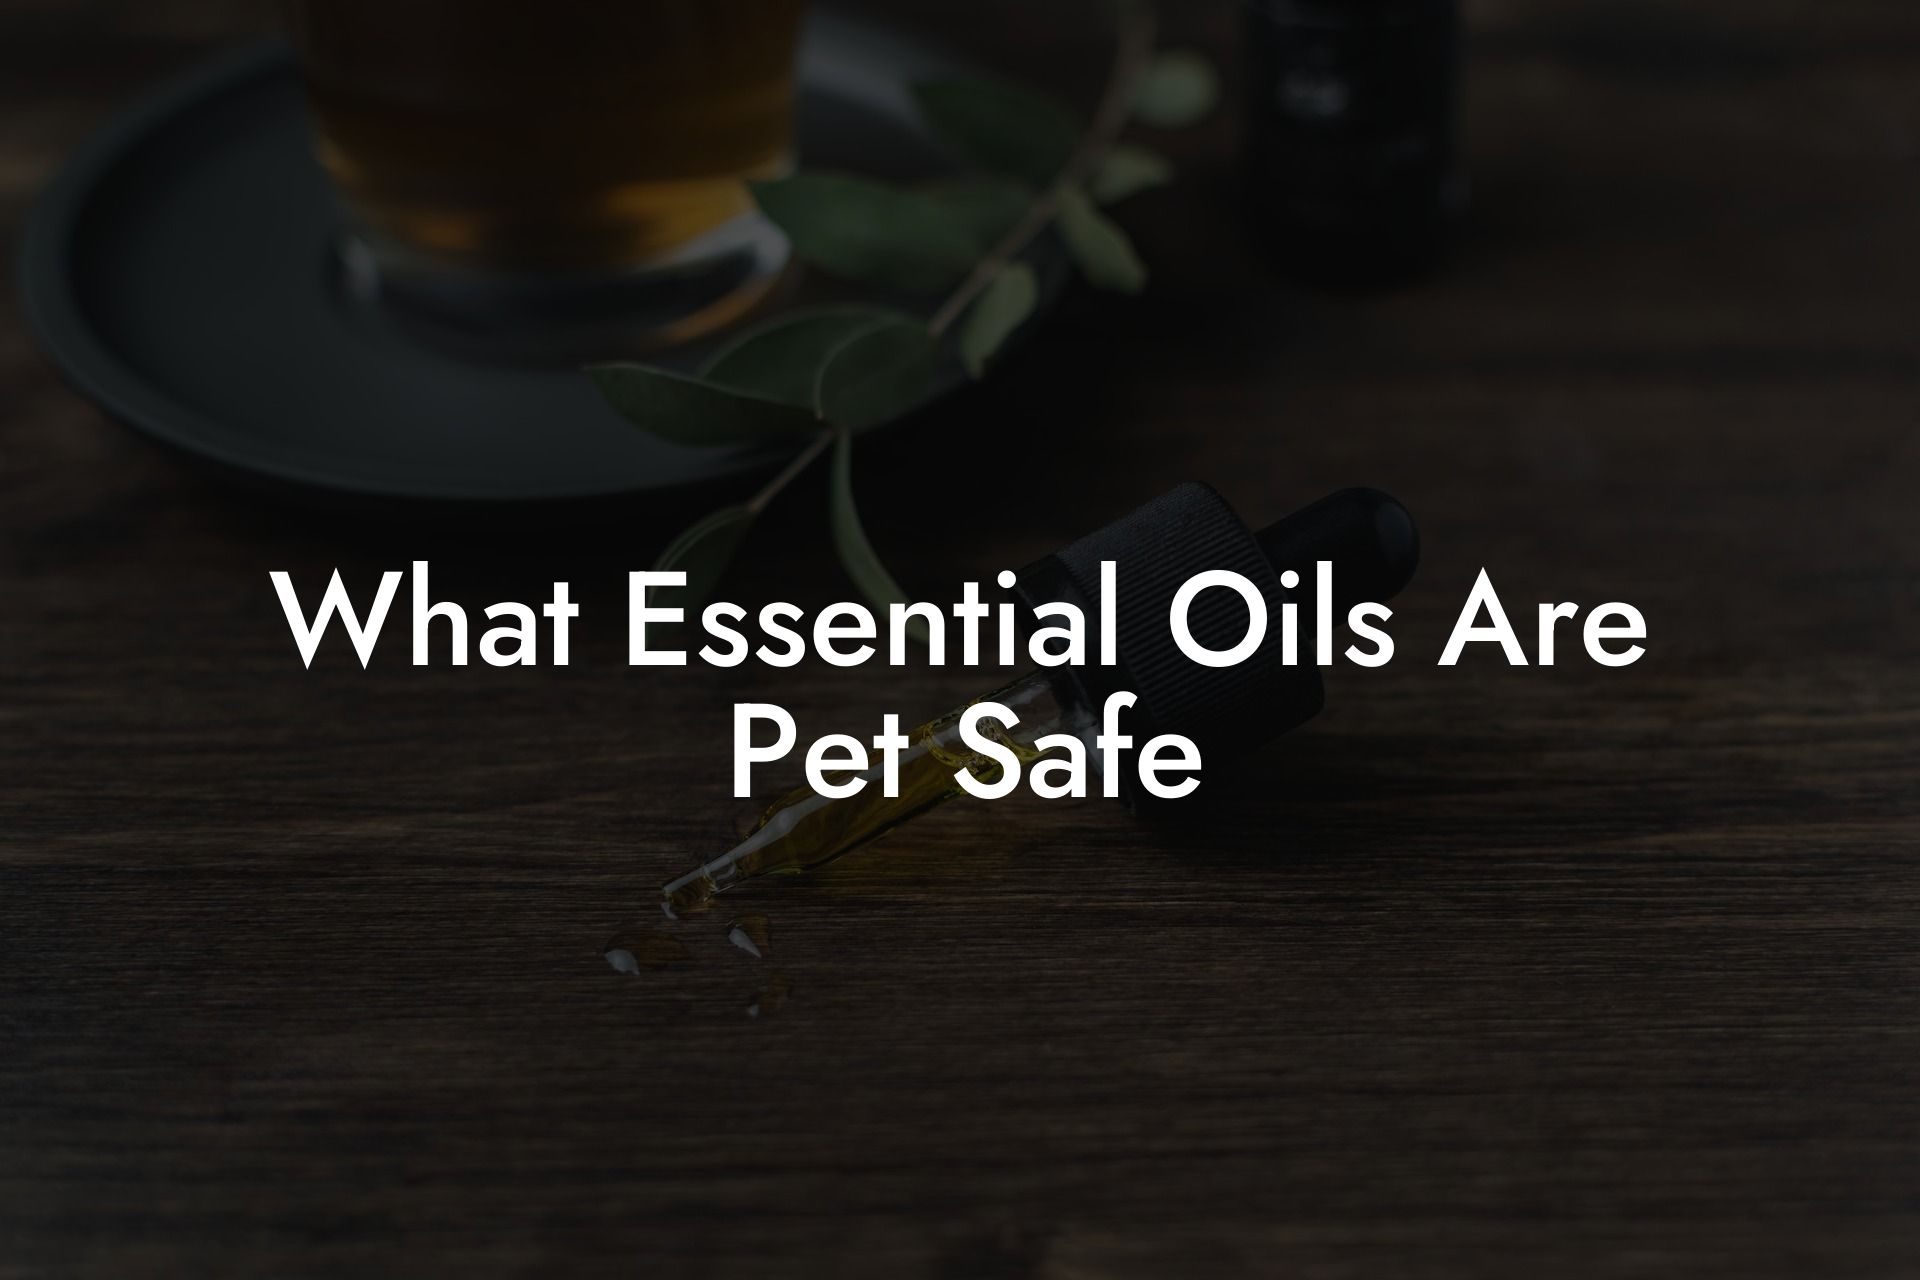 What Essential Oils Are Pet Safe